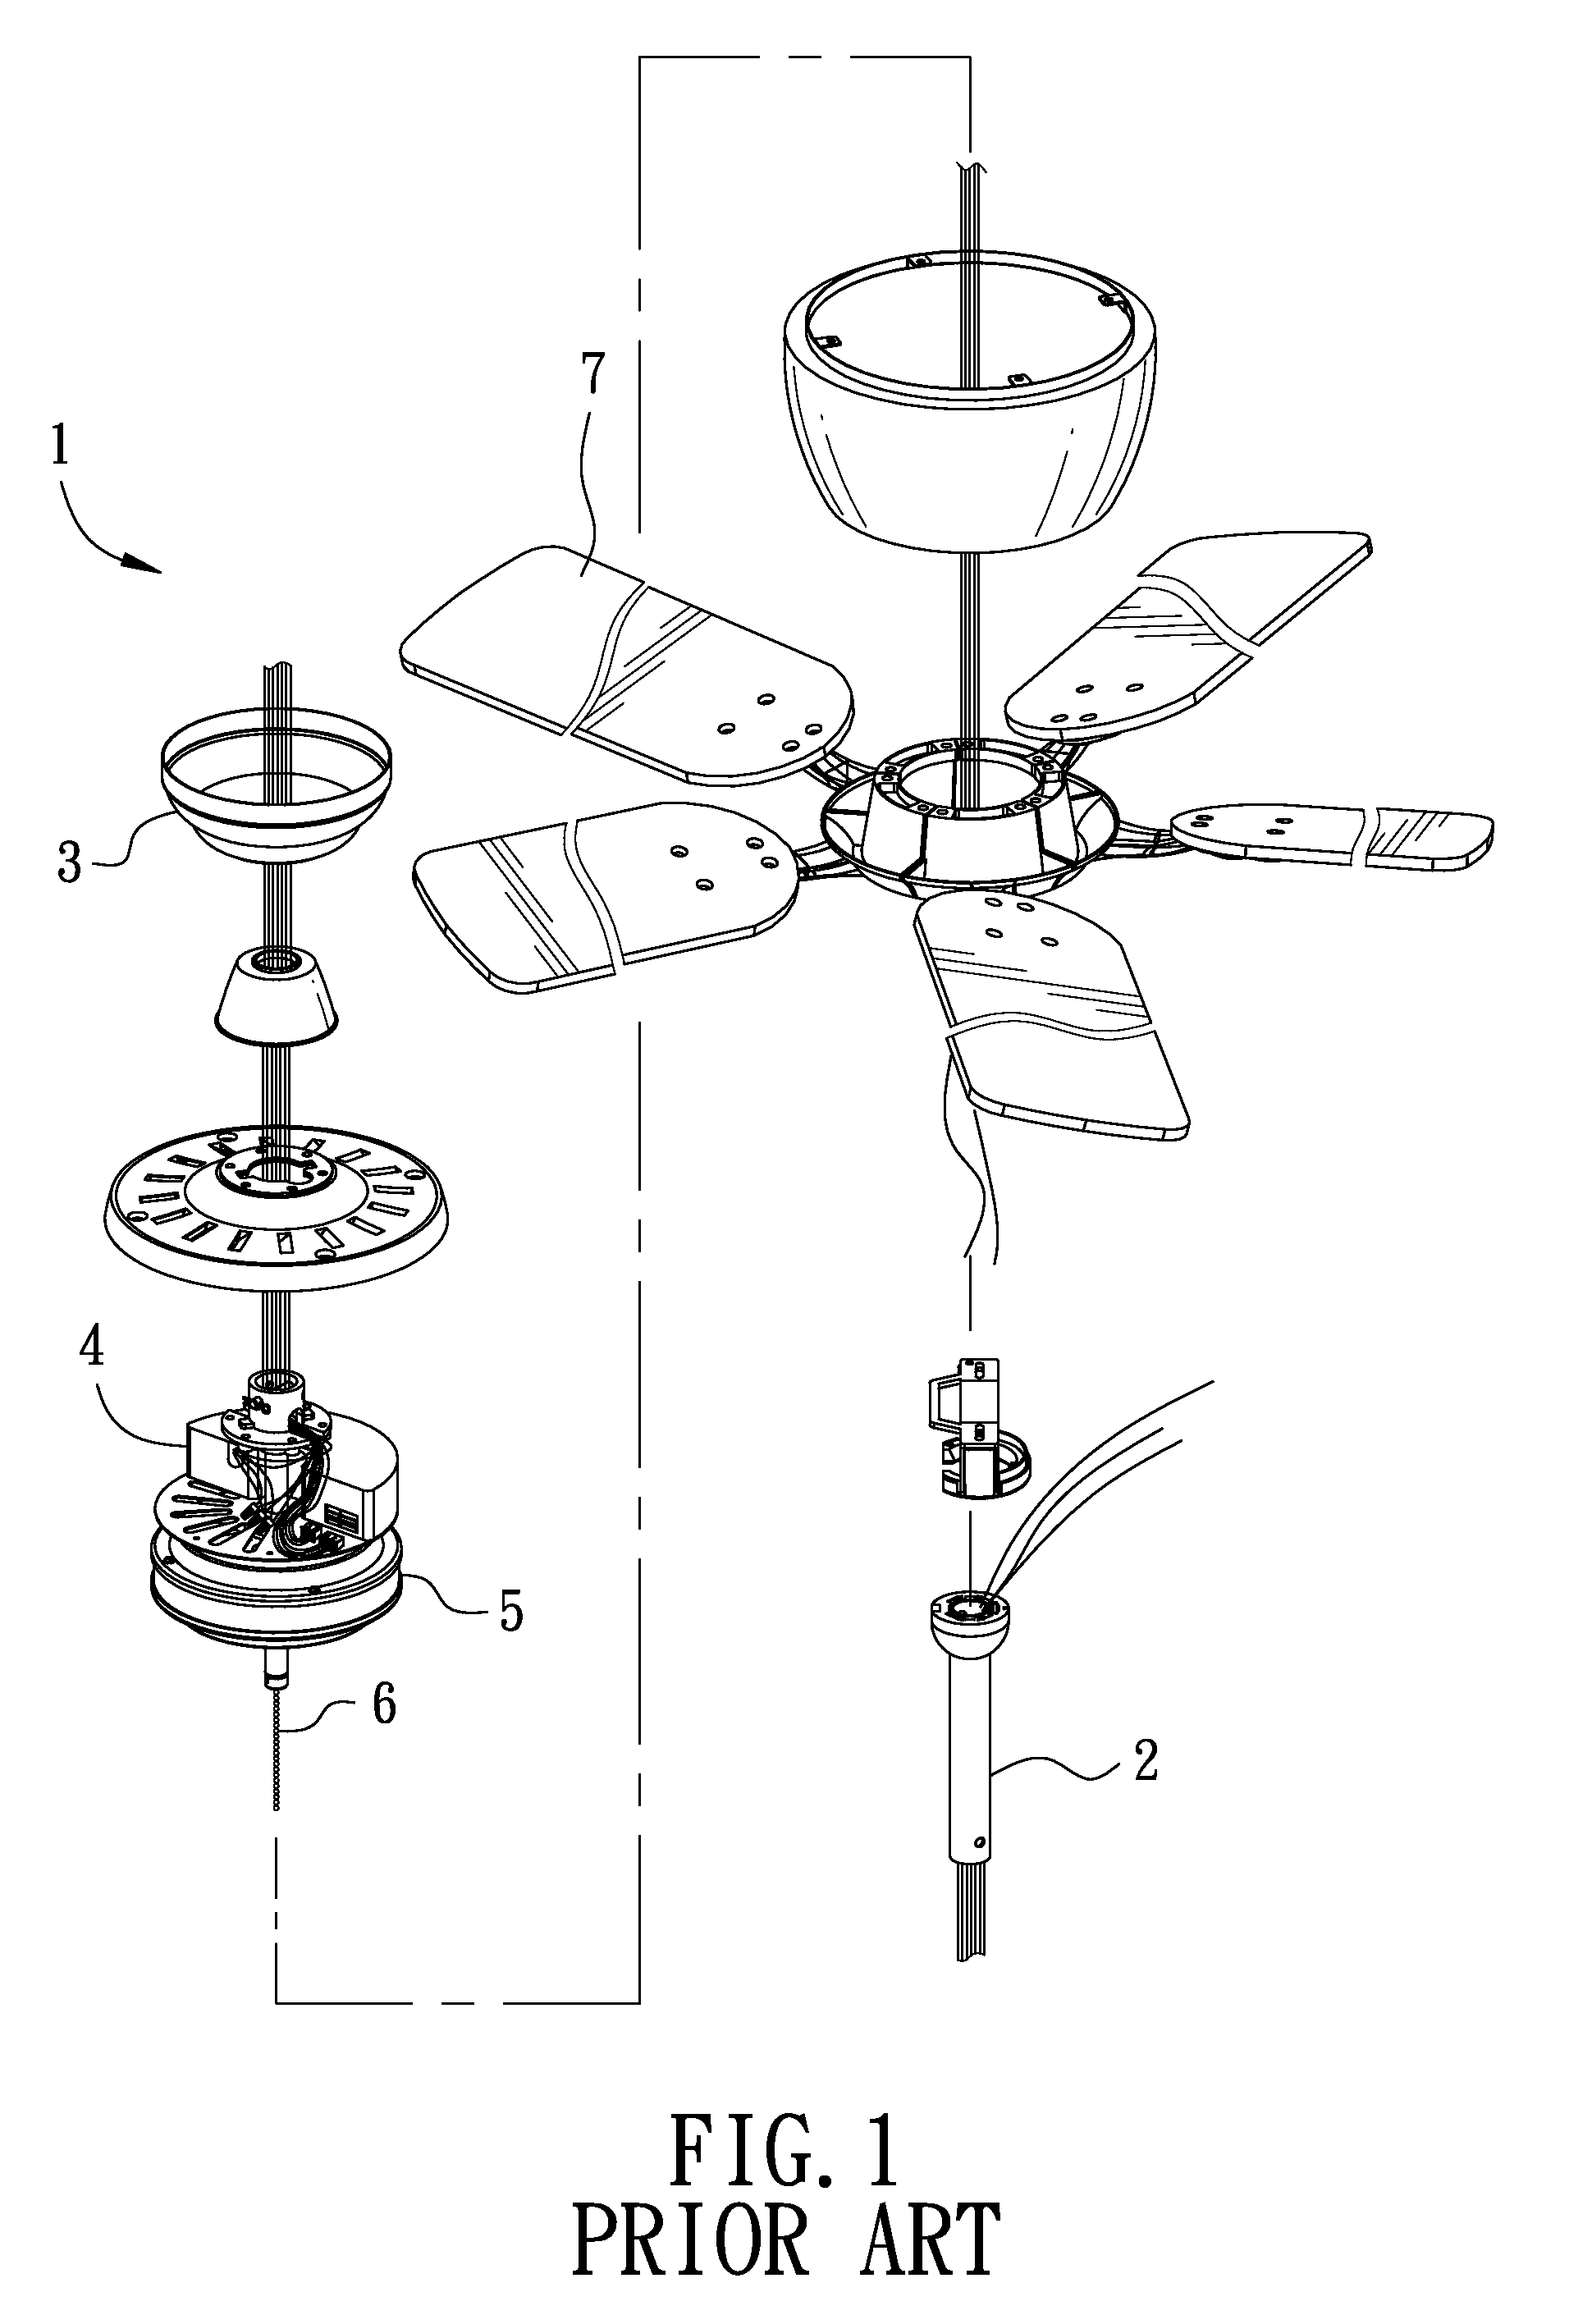 Changeover device of pull cord control and wireless remote control for a DC brushless-motor ceiling fan